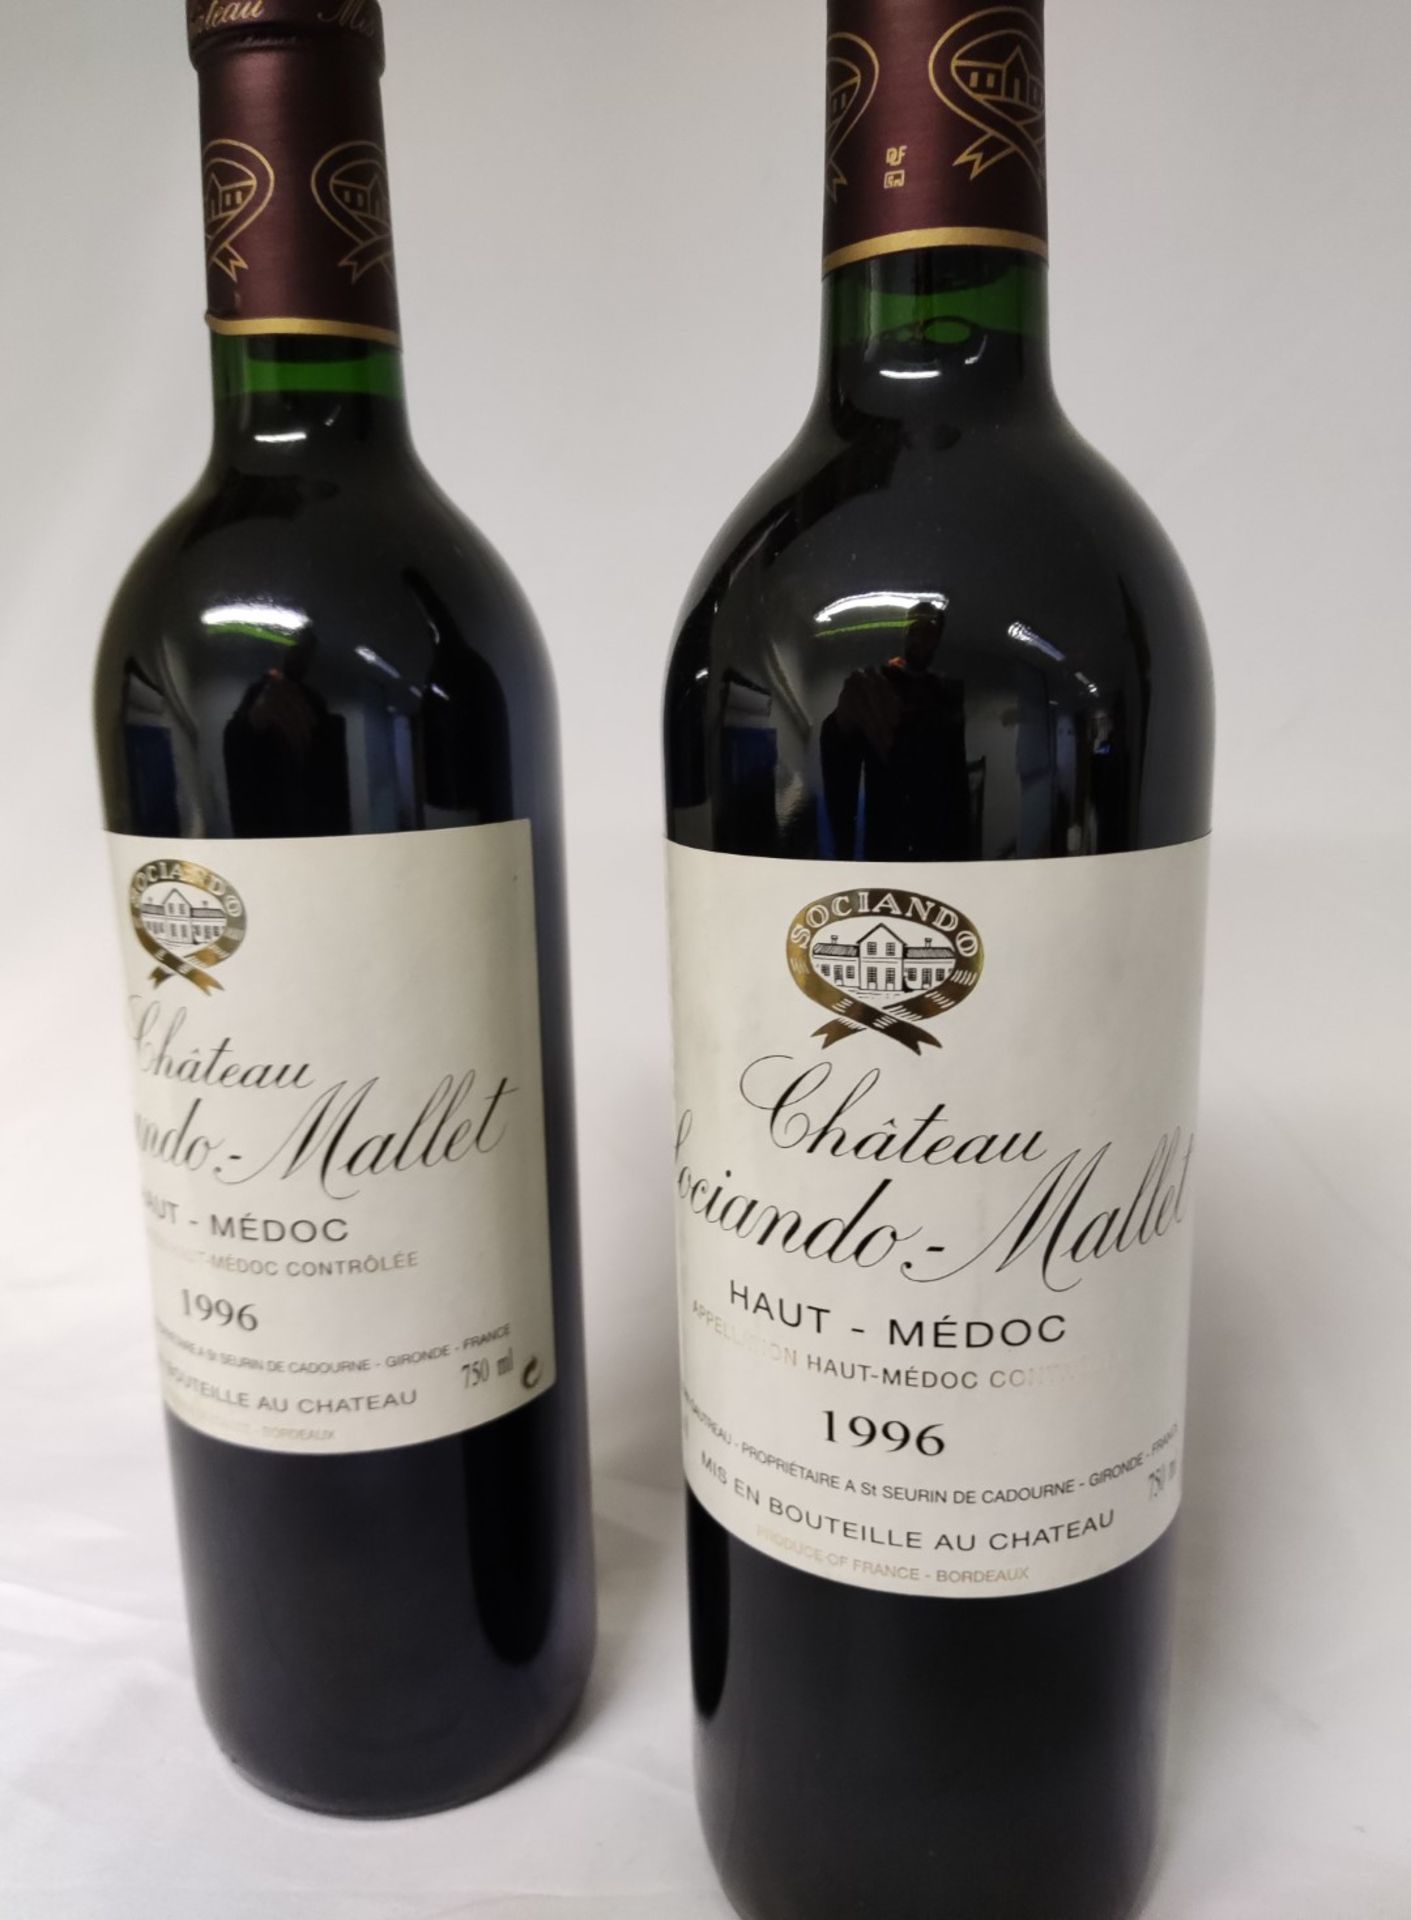 2 x Bottles of 1996 Chateau Sociando-Mallet, Haut-Medoc, France - Dry Red Wine - RRP £260 - Image 3 of 7